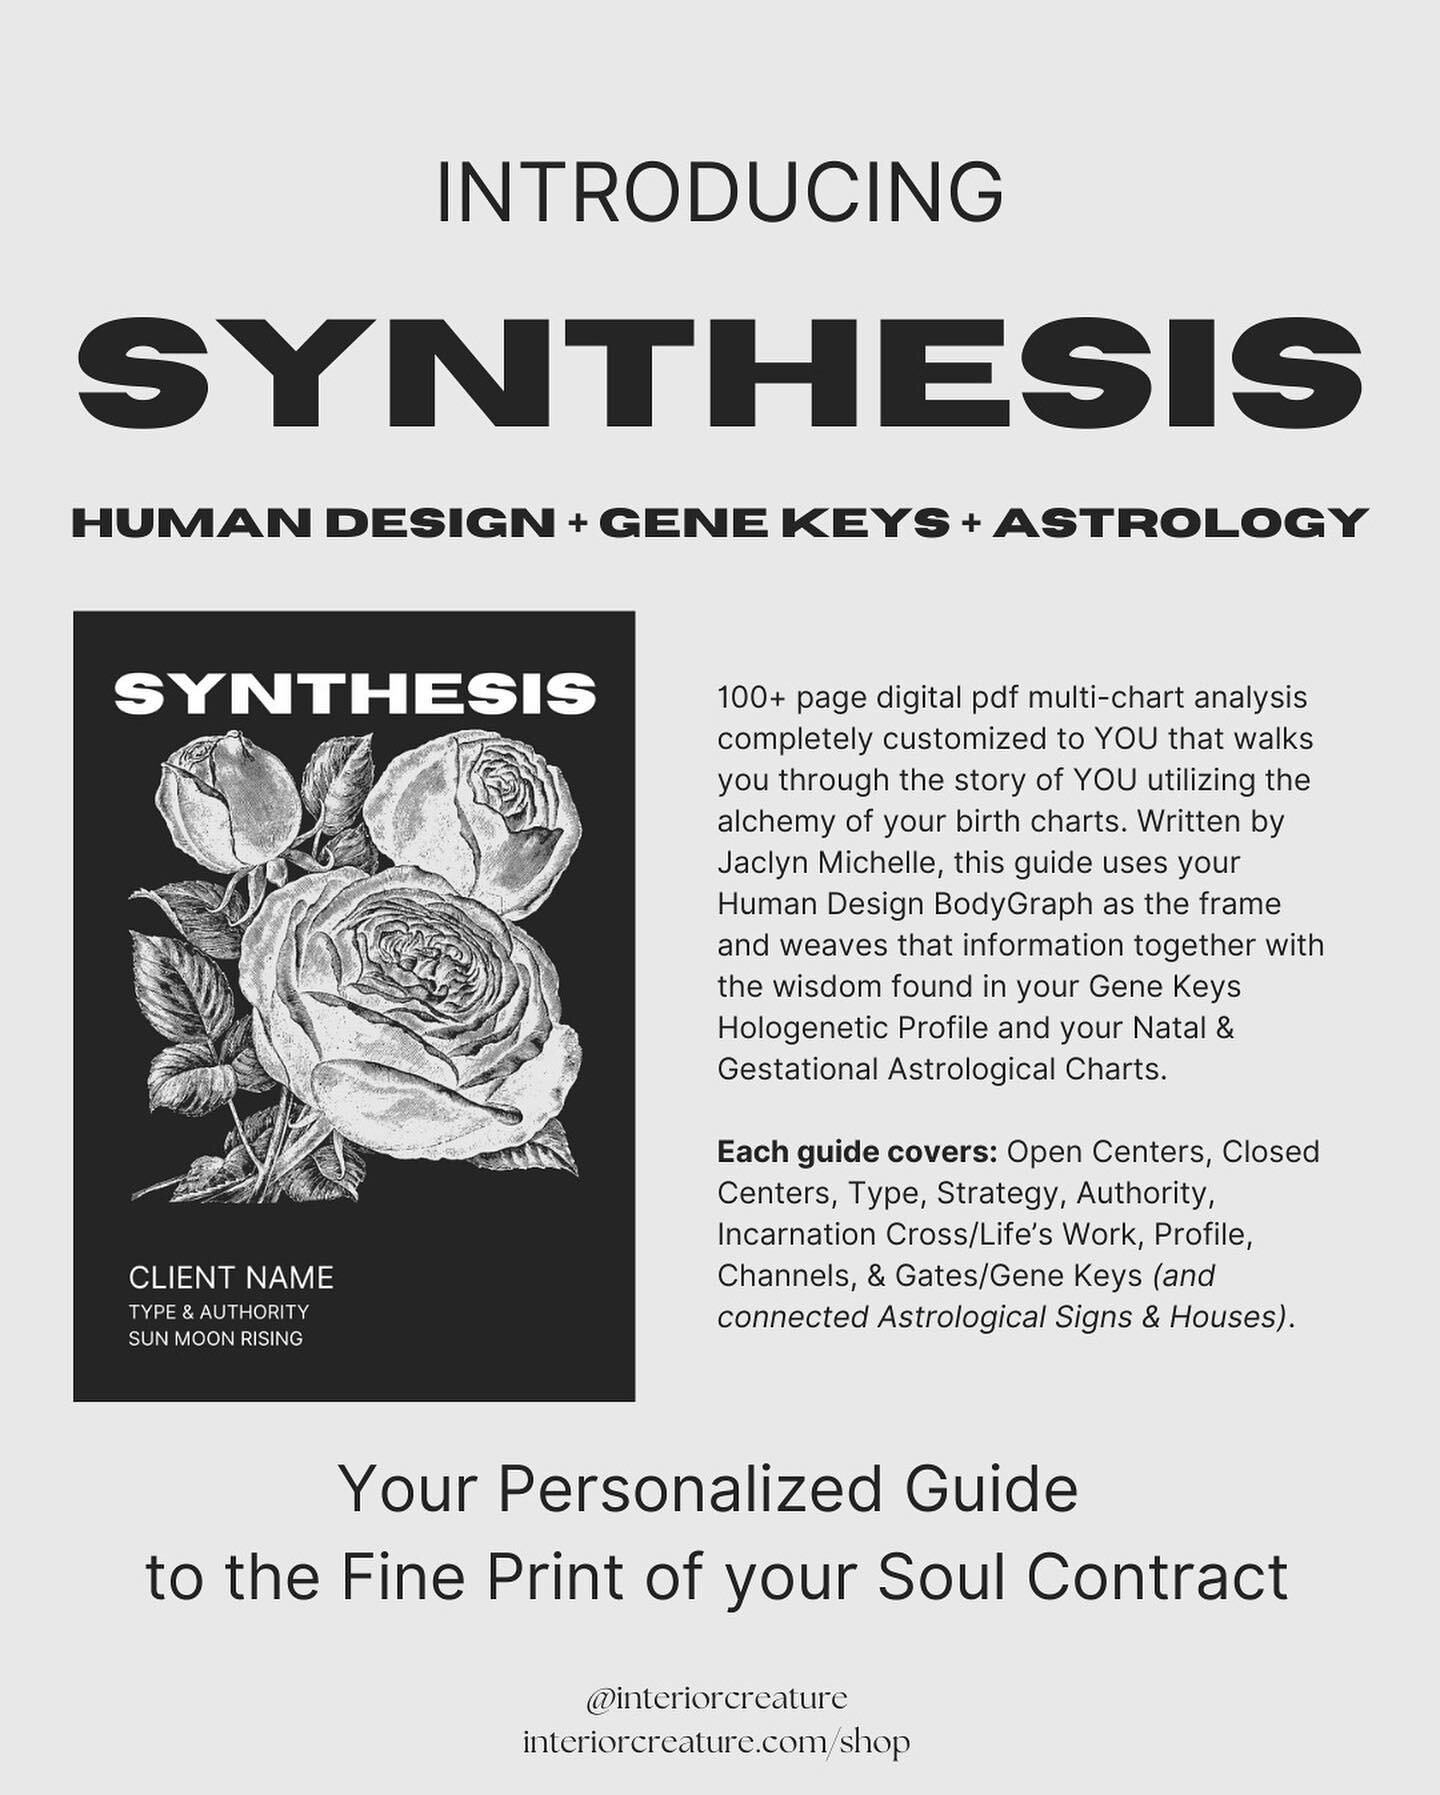 INTRODUCING SYNTHESIS
A completely customized, multi-chart analysis guide that walks you through the story of YOU utilizing the alchemy of your birth charts. Written by yours truly in practical, accessible, and, dare I say humorous language, this gui